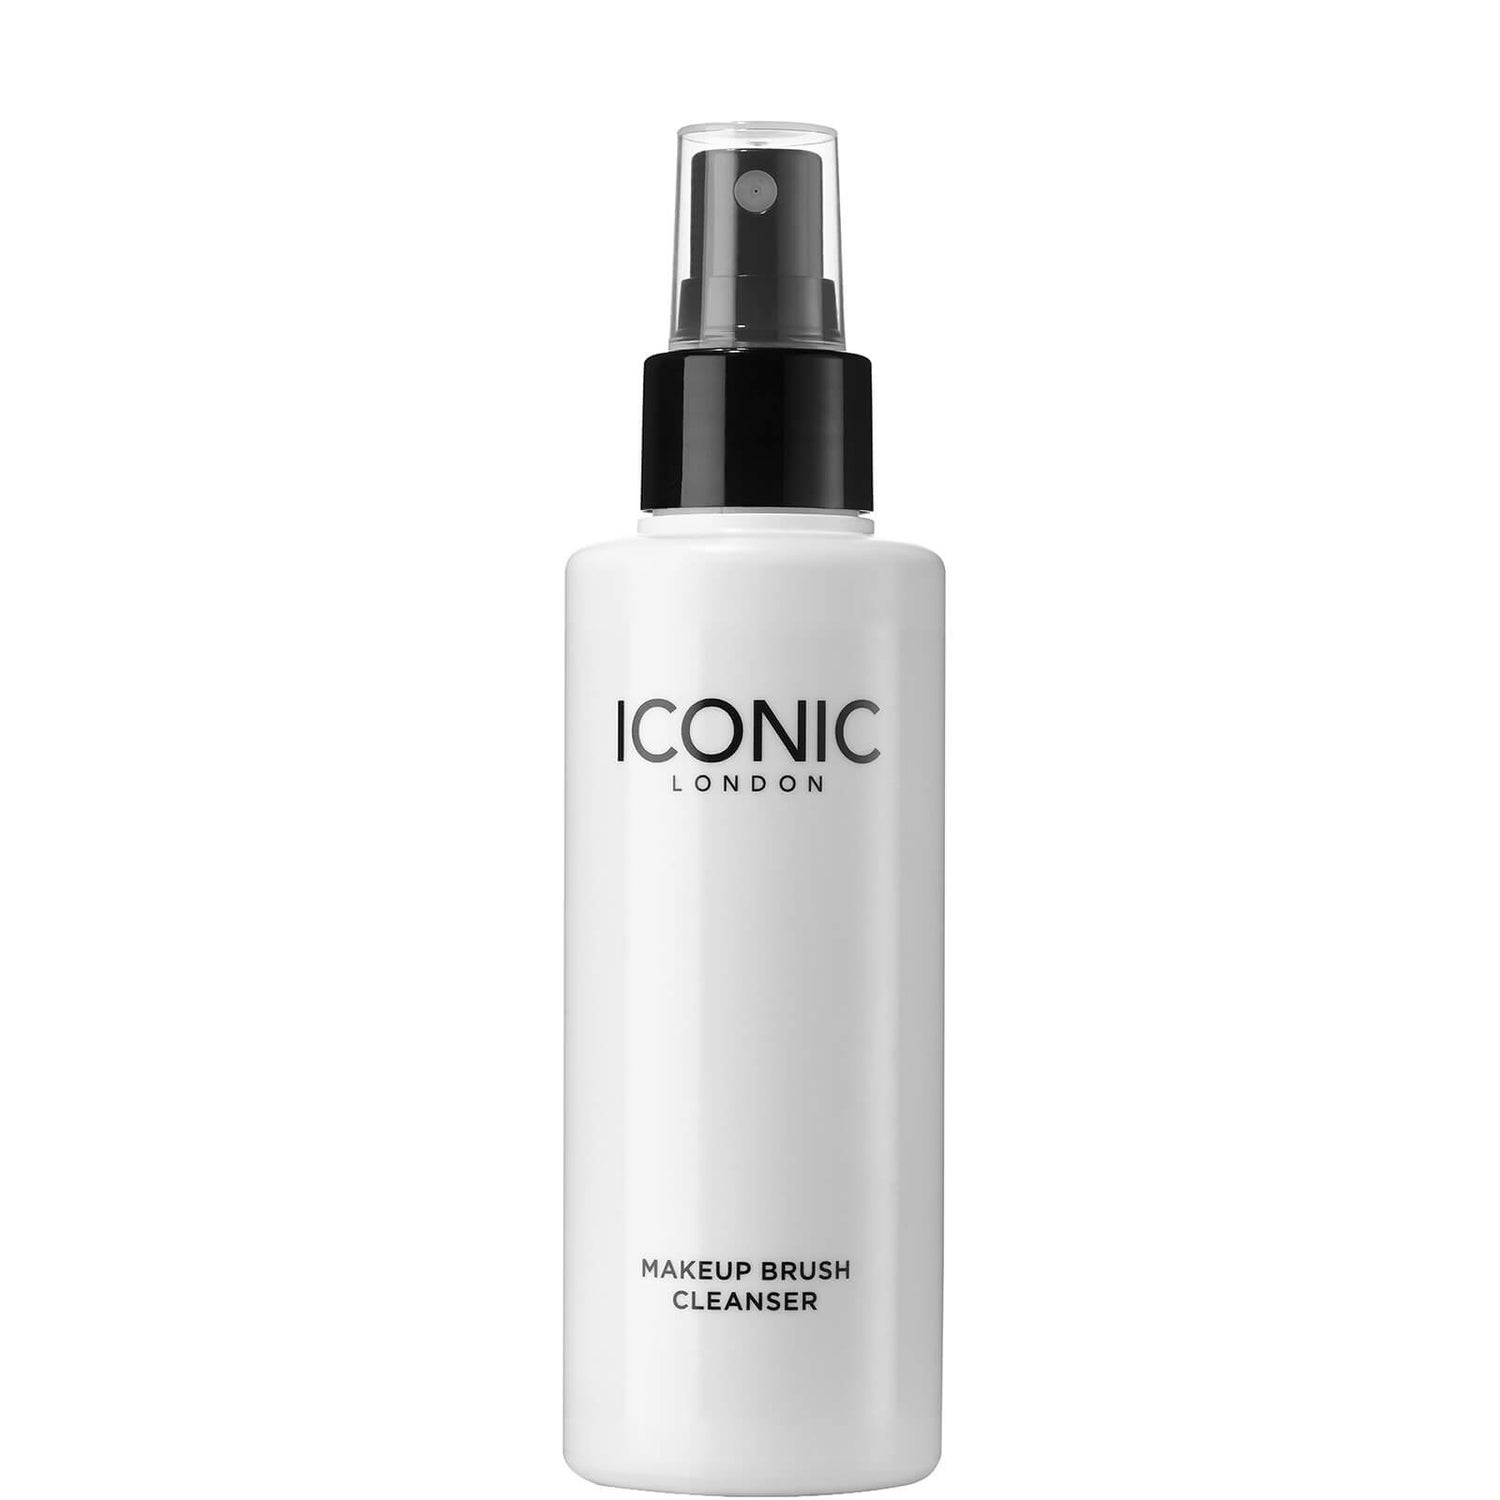 ICONIC LONDON Makeup Brush Cleanser